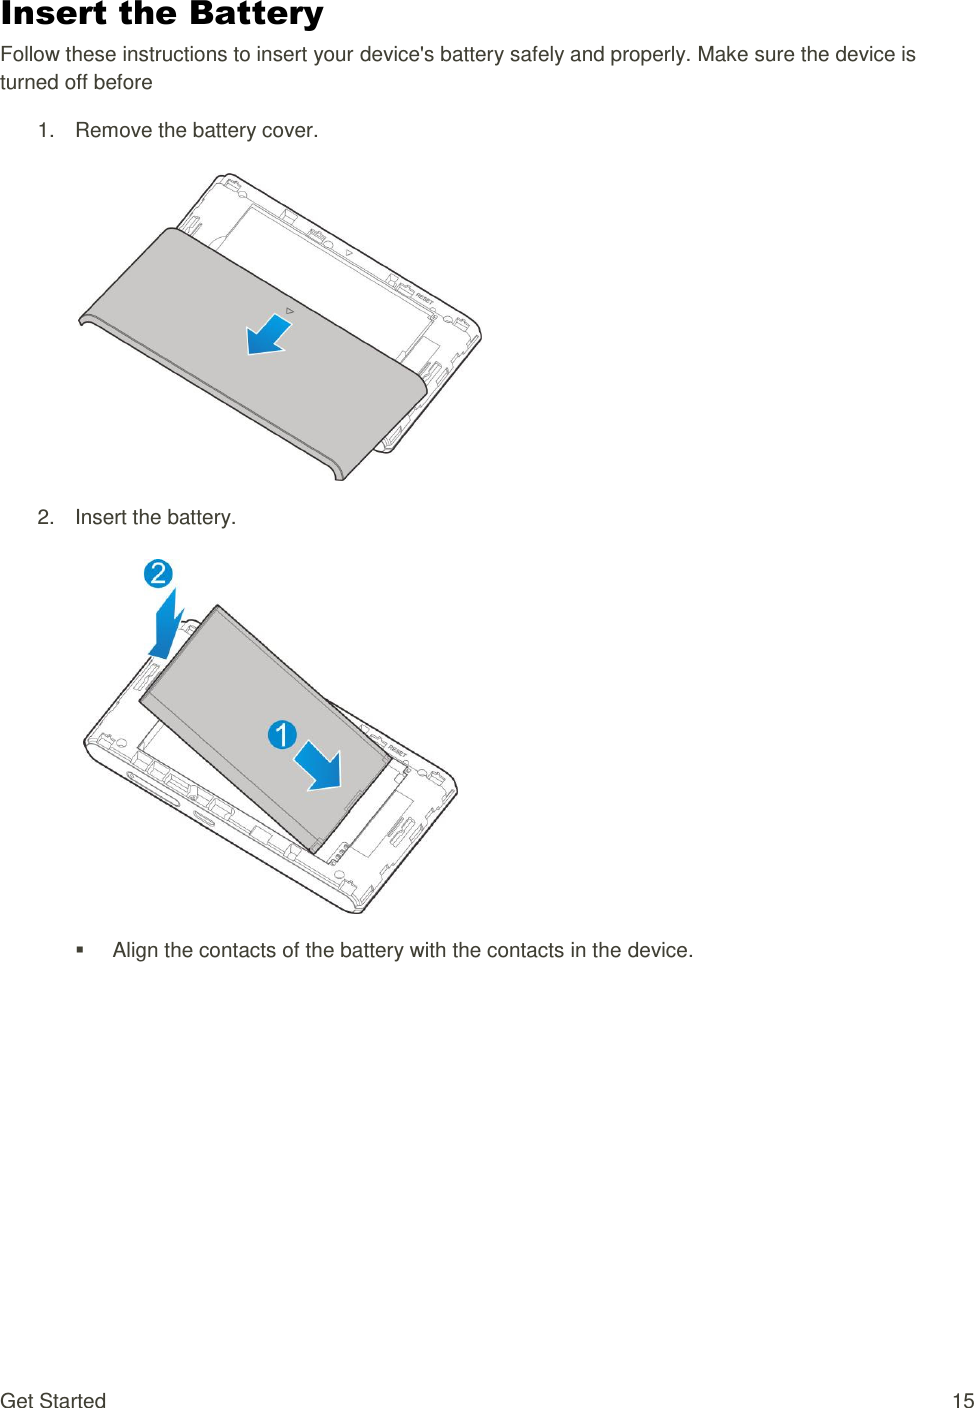 Get Started  15 Insert the Battery Follow these instructions to insert your device&apos;s battery safely and properly. Make sure the device is turned off before  1.  Remove the battery cover.    2.  Insert the battery.        Align the contacts of the battery with the contacts in the device. 